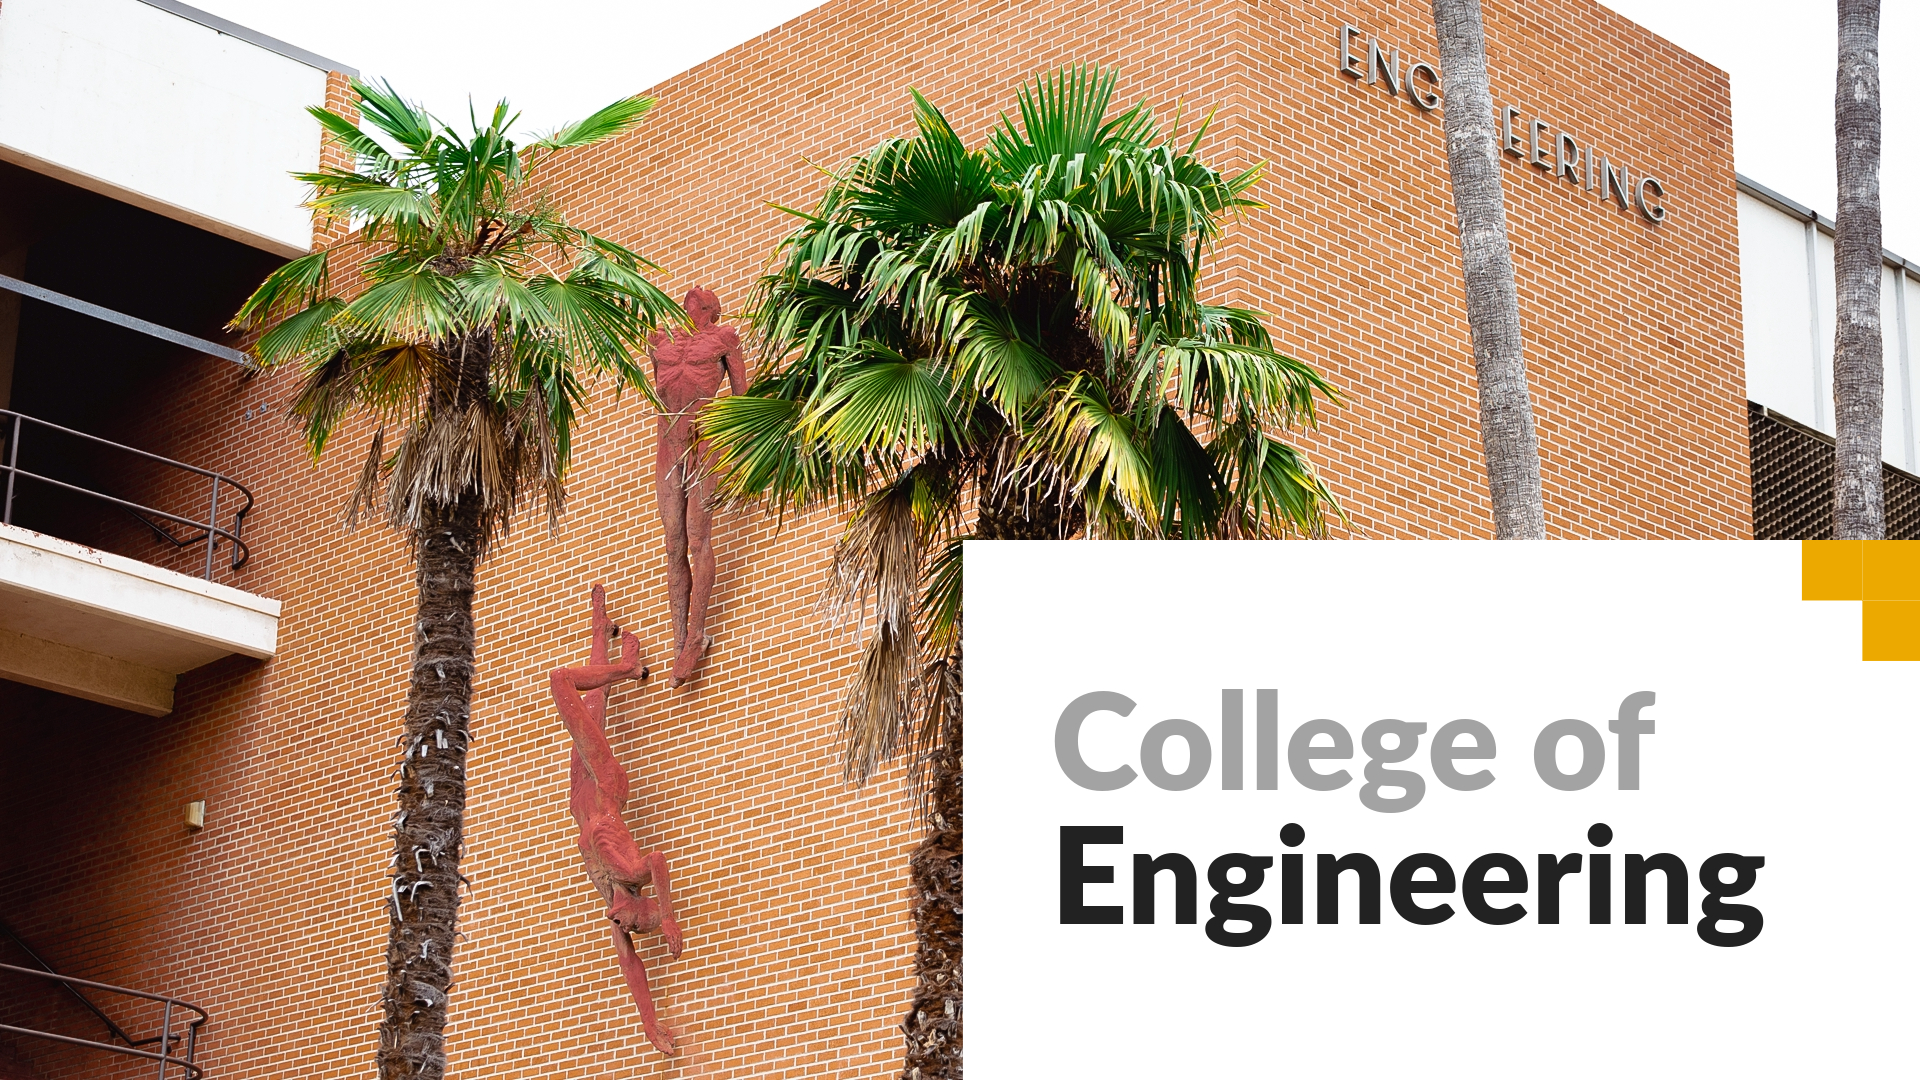 College of Engineering. Image shows the facade of the engineering building at CSULB. 